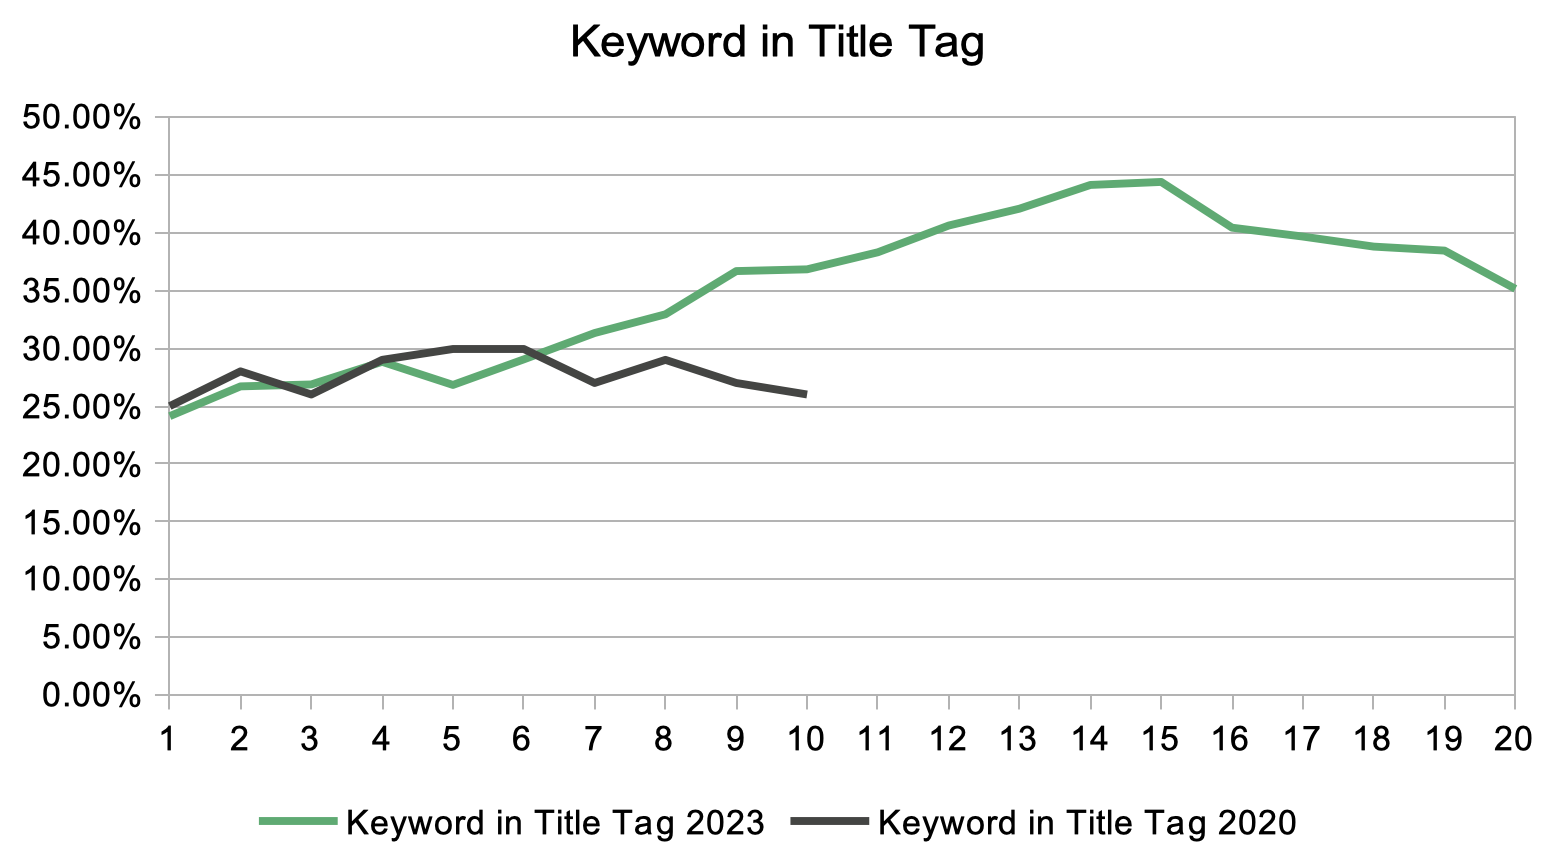 presence of the exact match keyword in title tags of top ranking pages on Baidu organic search